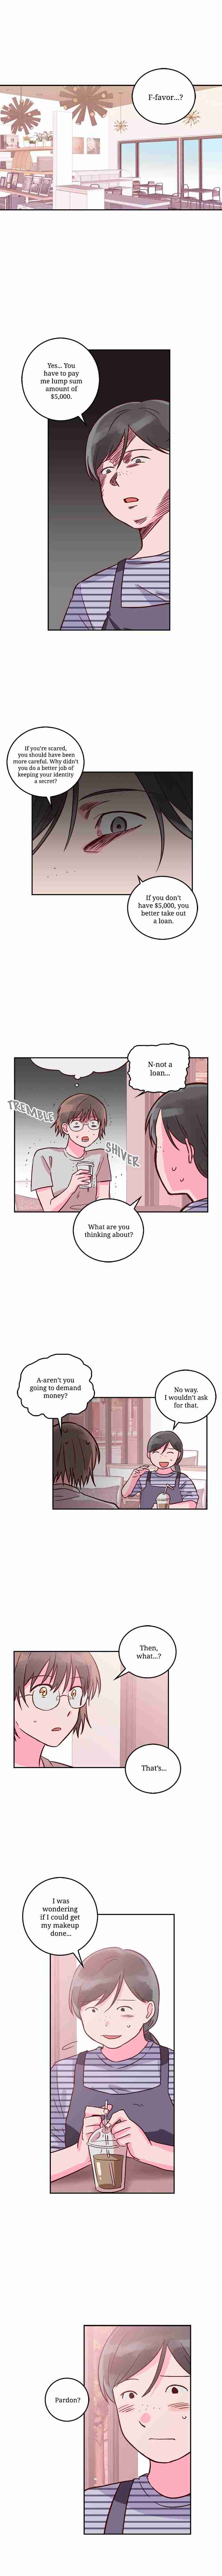 The Man Who Cleans Up Makeup Ch. 19